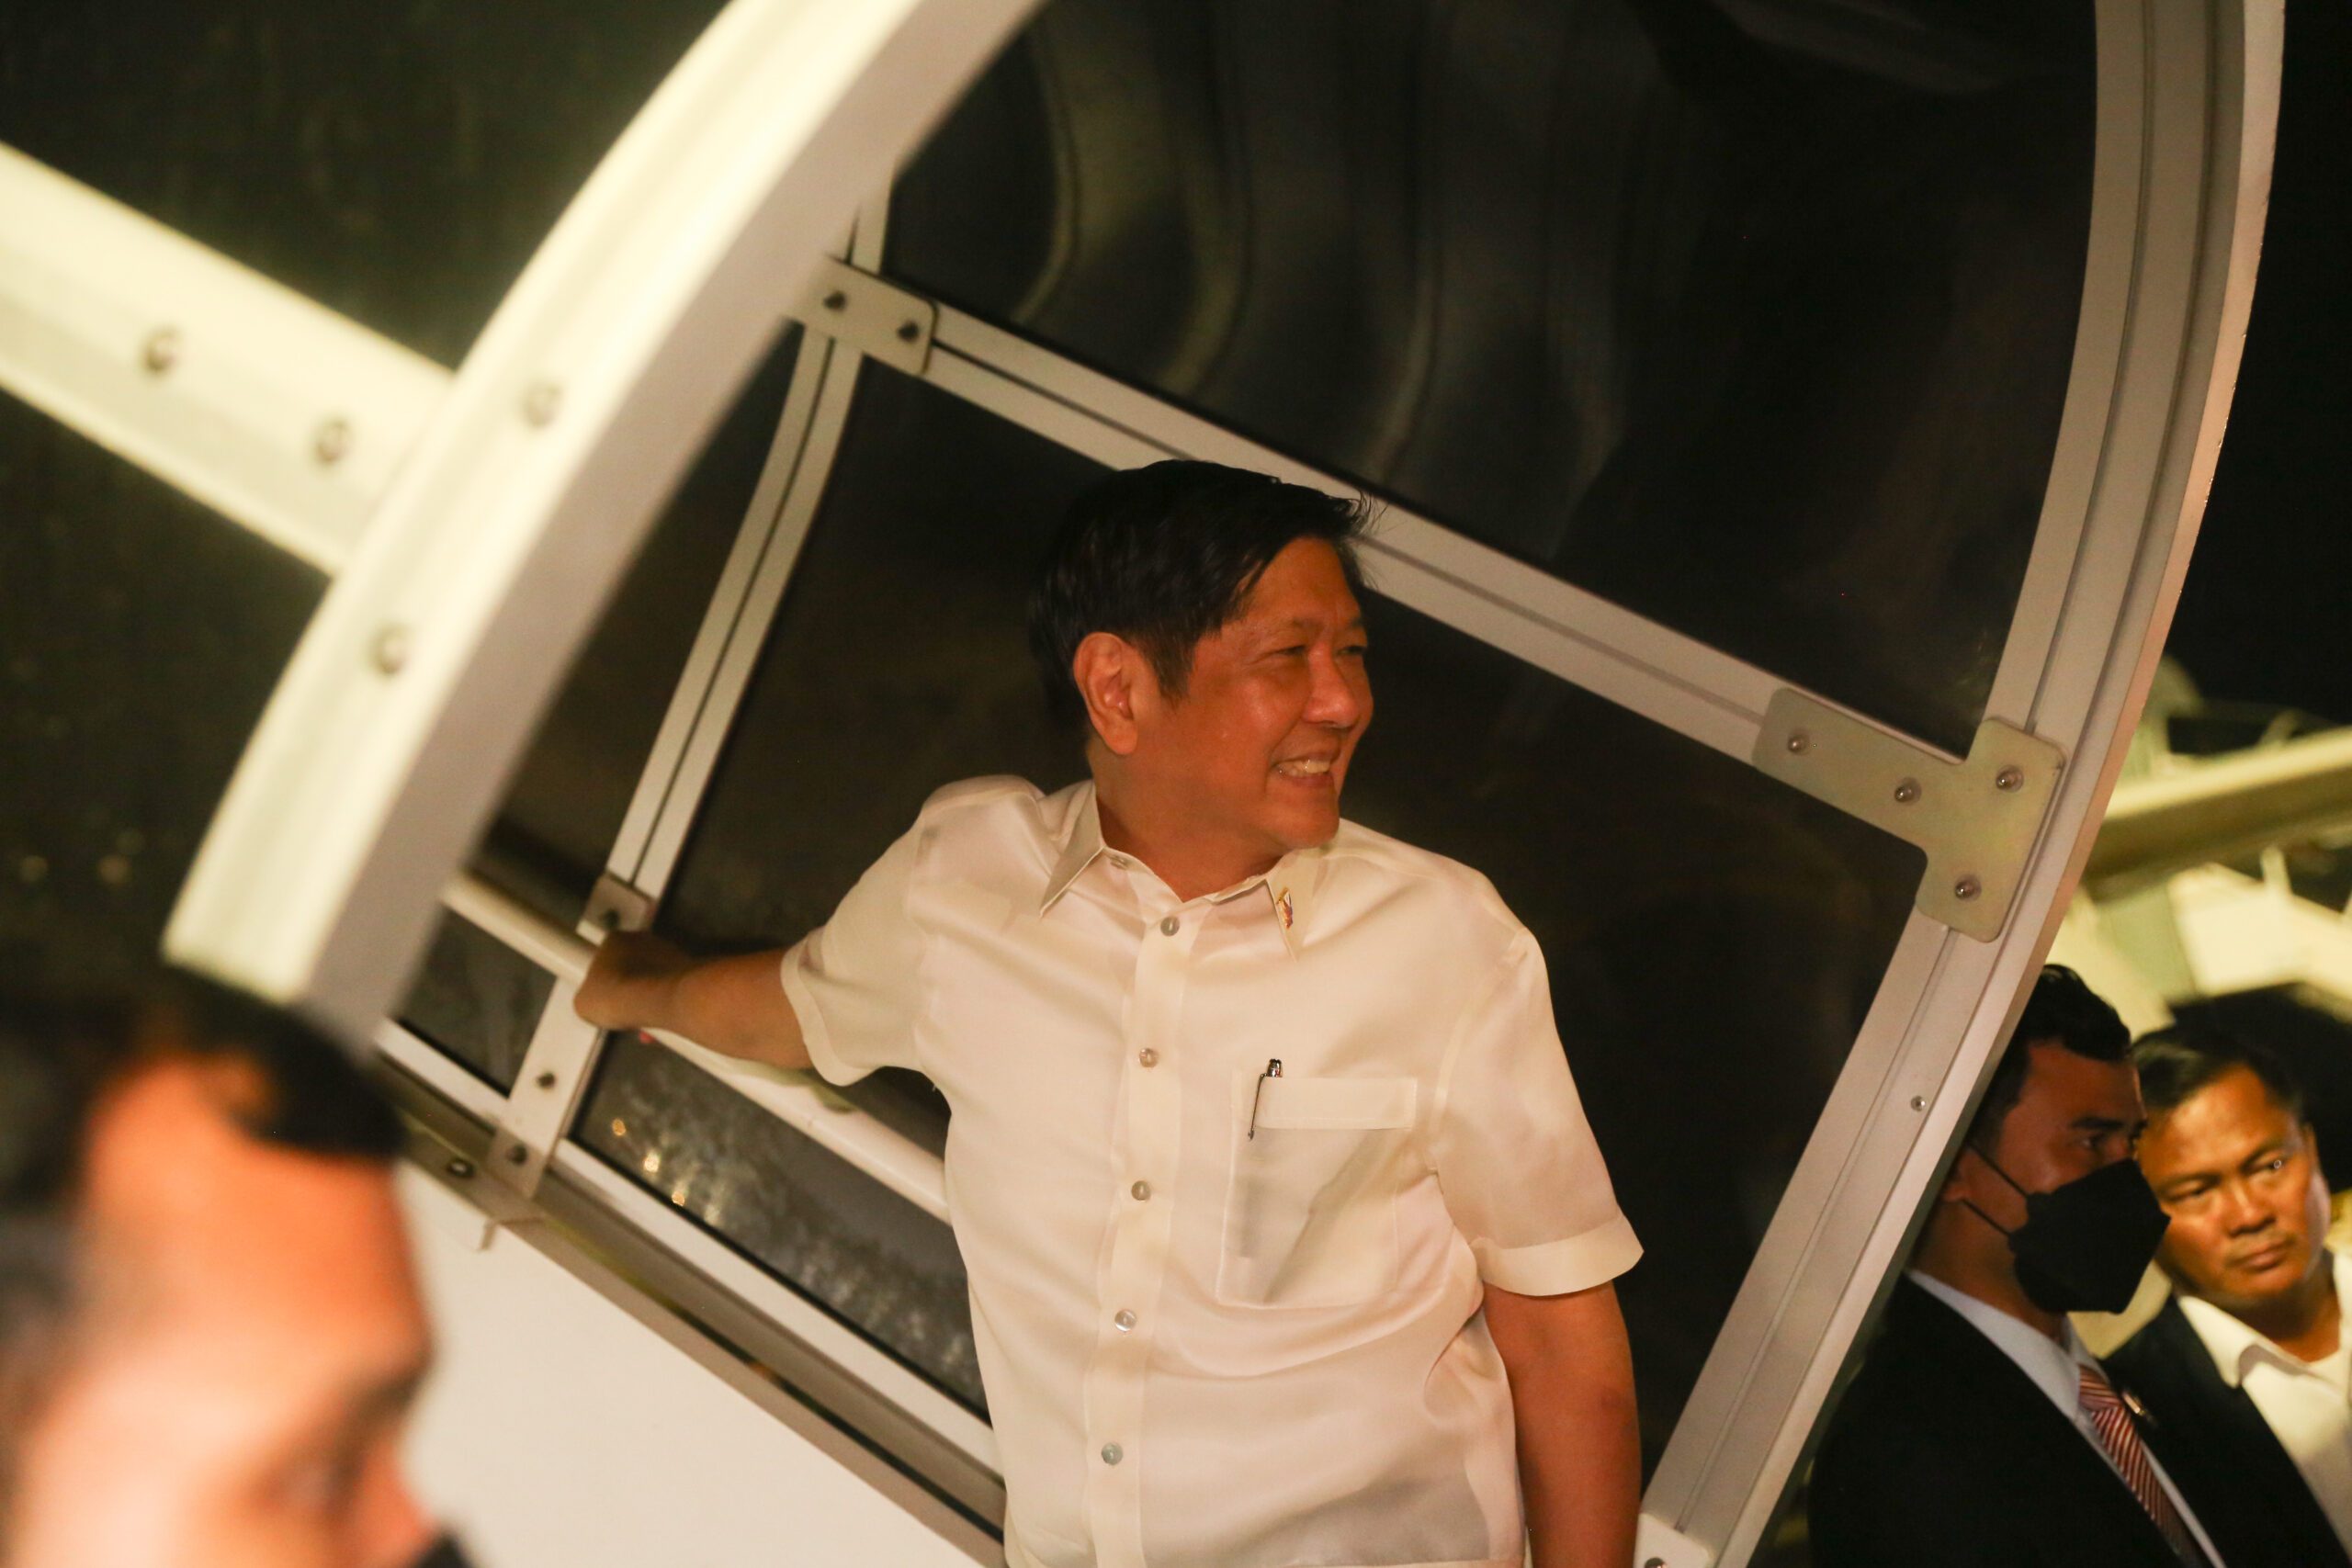 Too much travel? Marcos weighs Davos invite